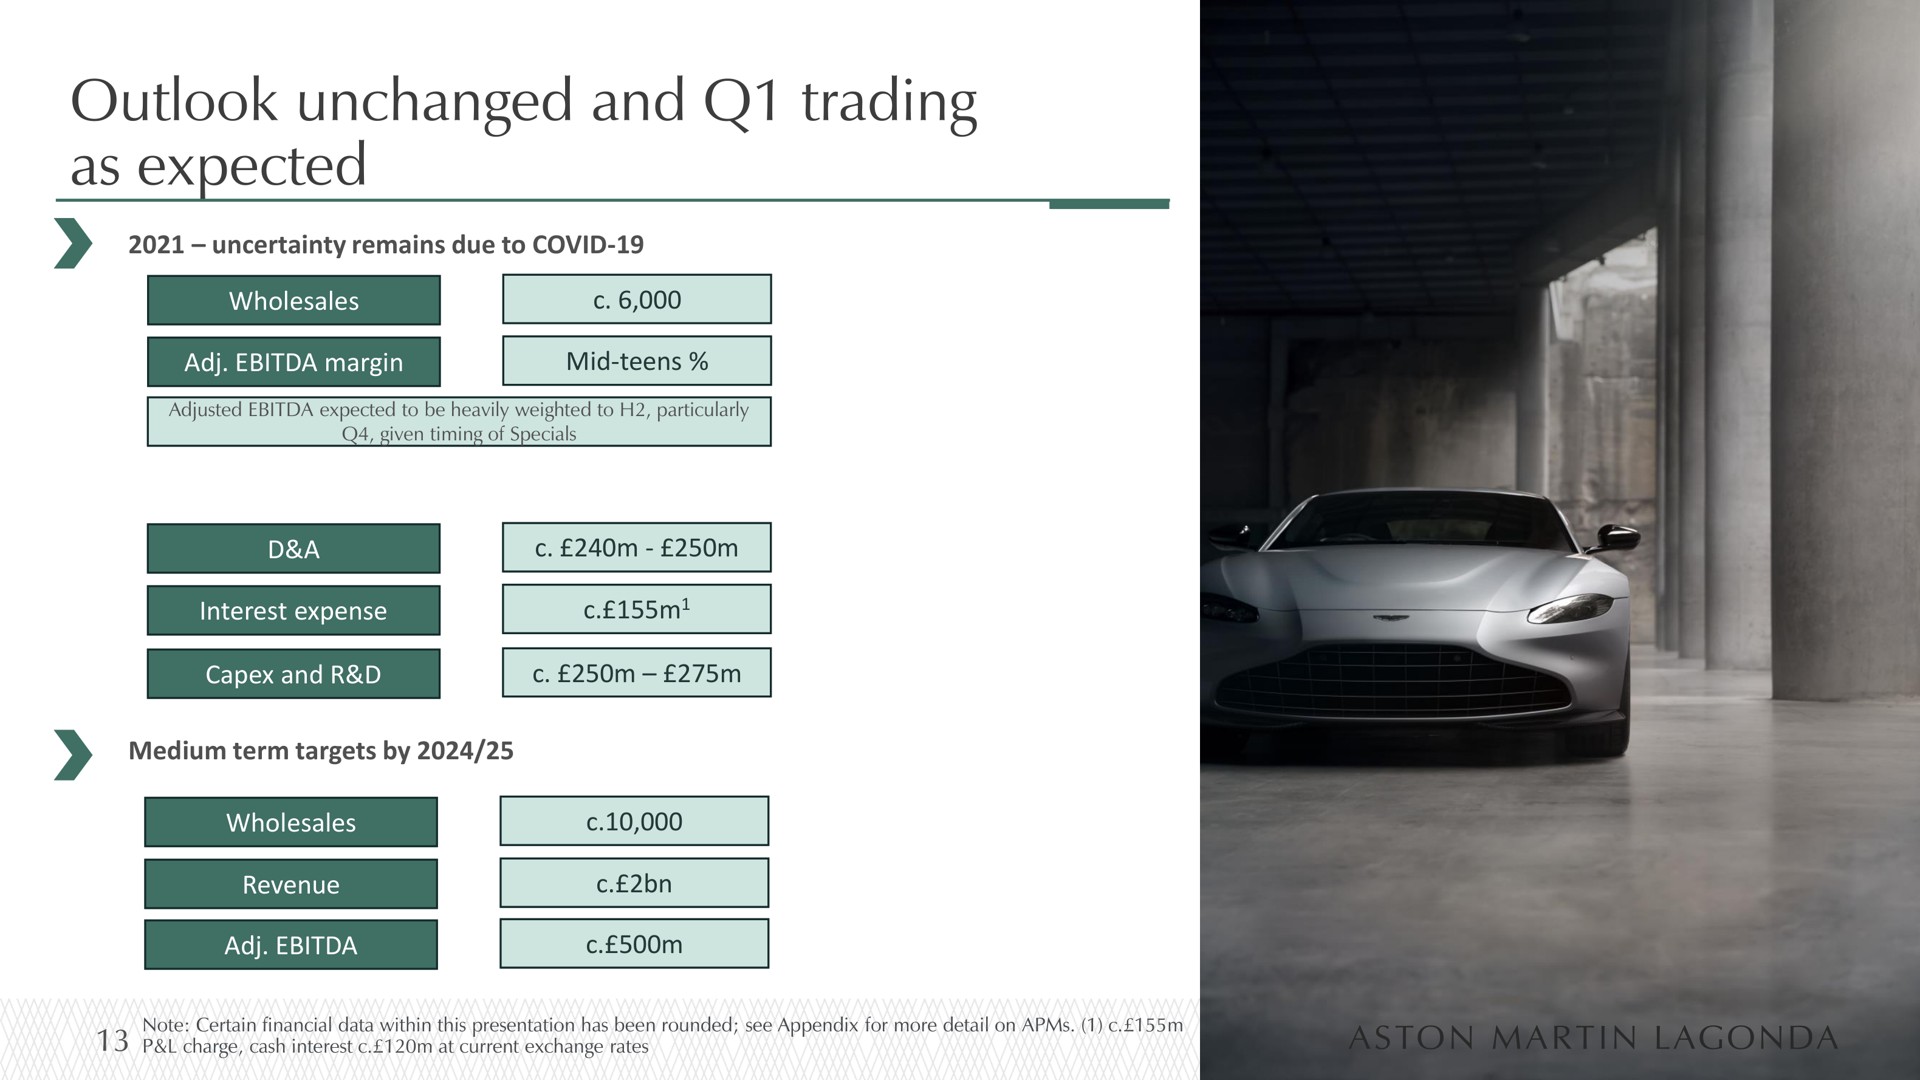 outlook unchanged and trading as expected | Aston Martin Lagonda